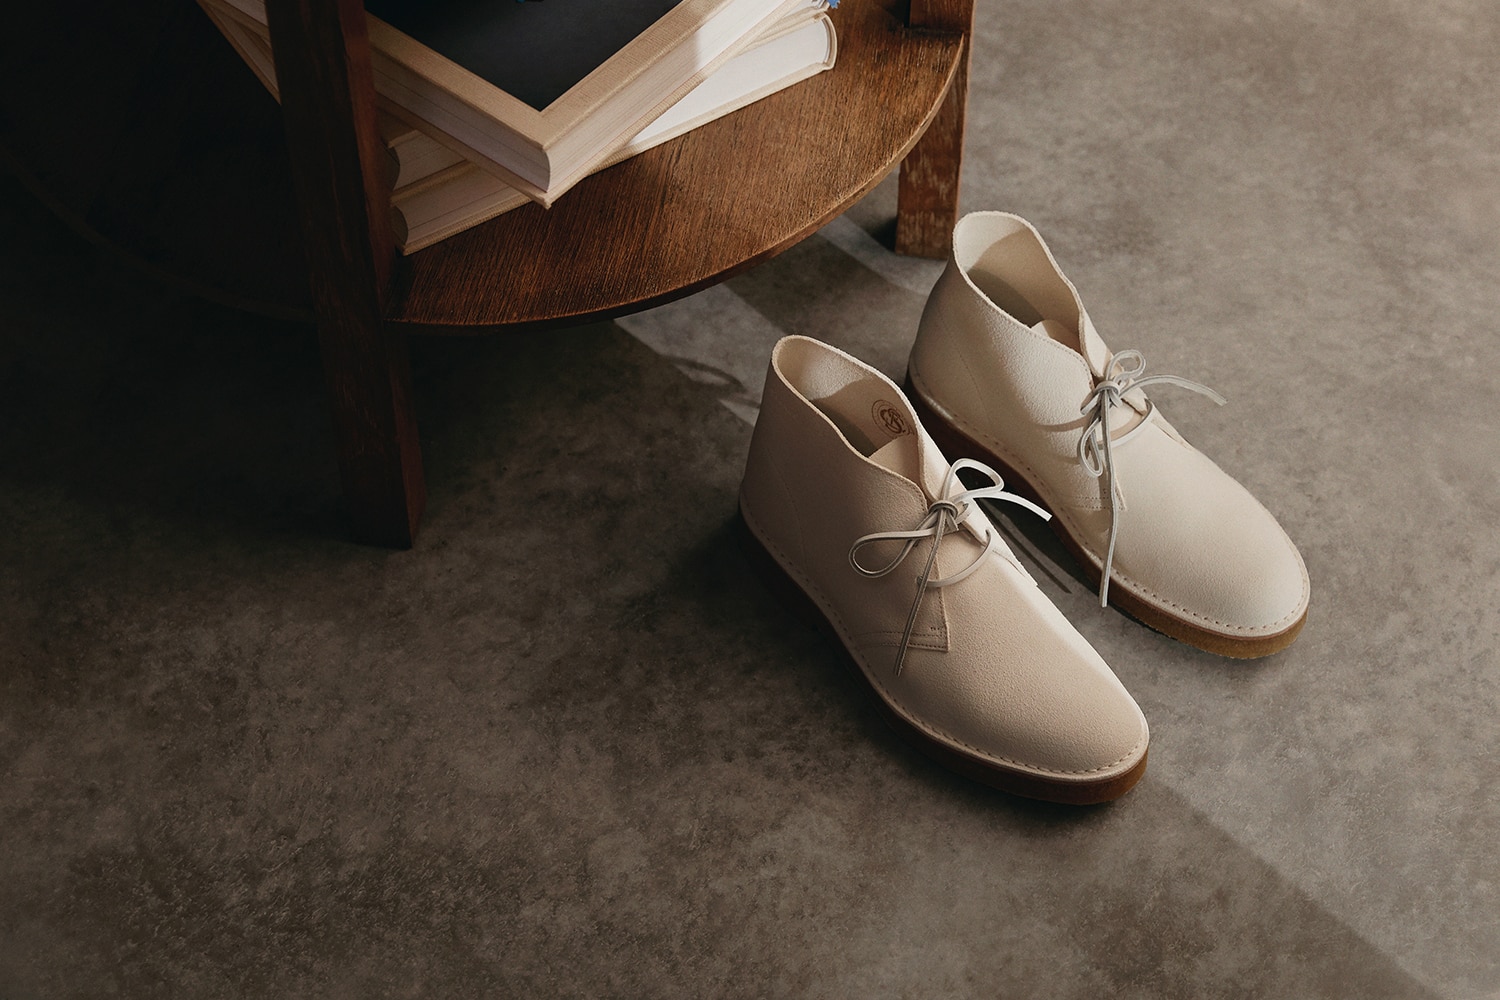 Make History This Year With Iconic Shoes From Clarks Originals | The  Journal | MR PORTER